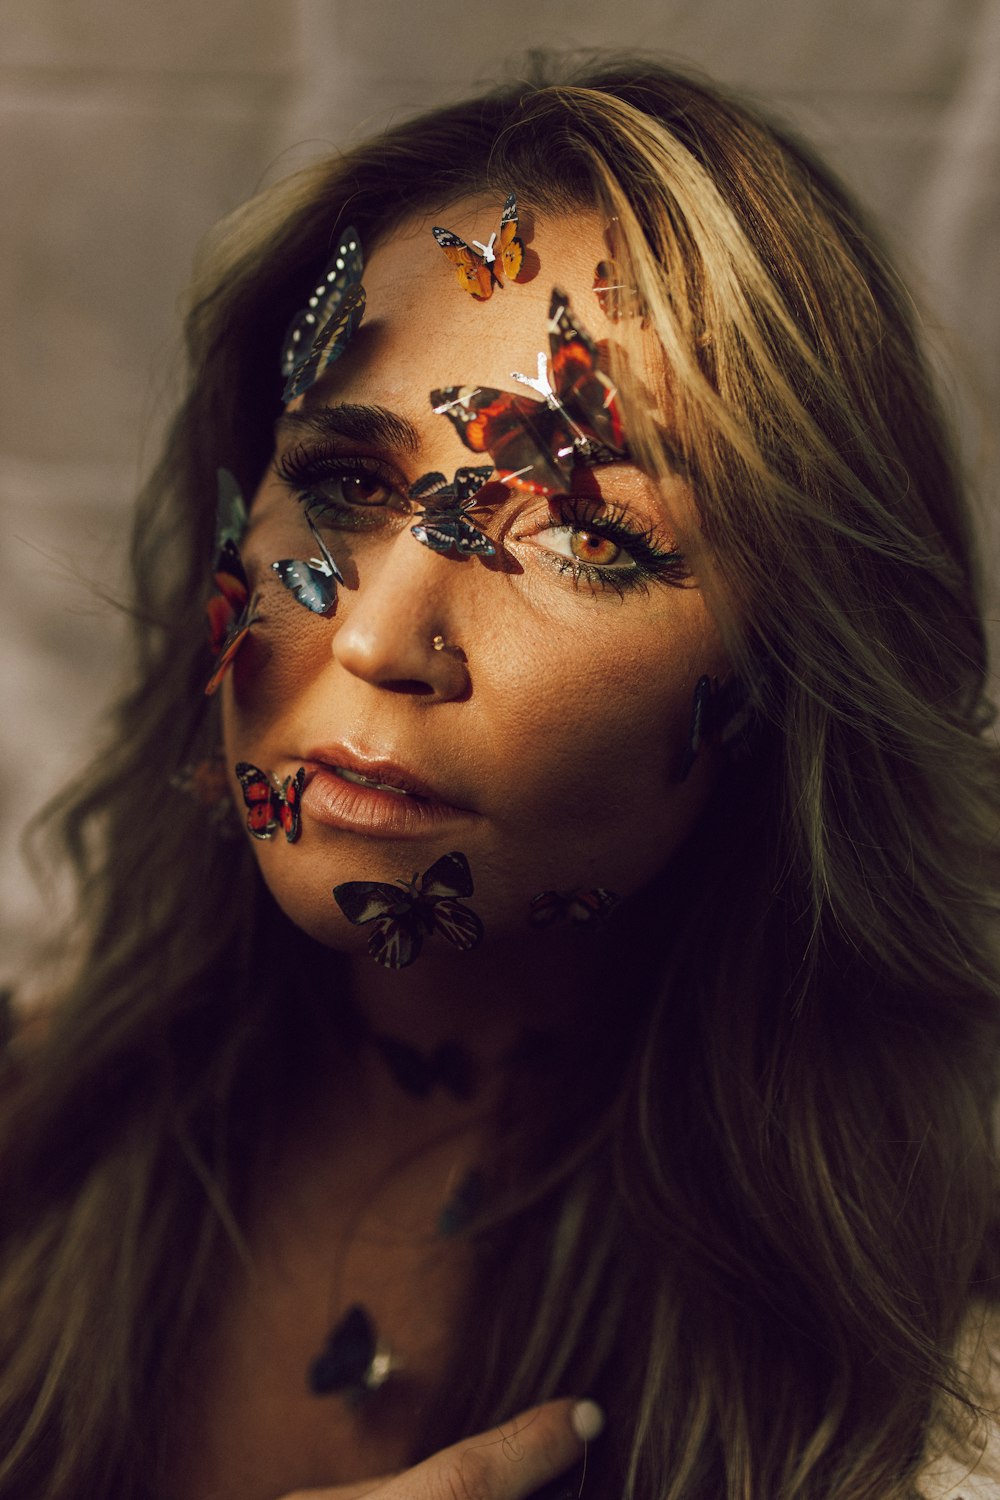 a woman with butterflies painted on her face